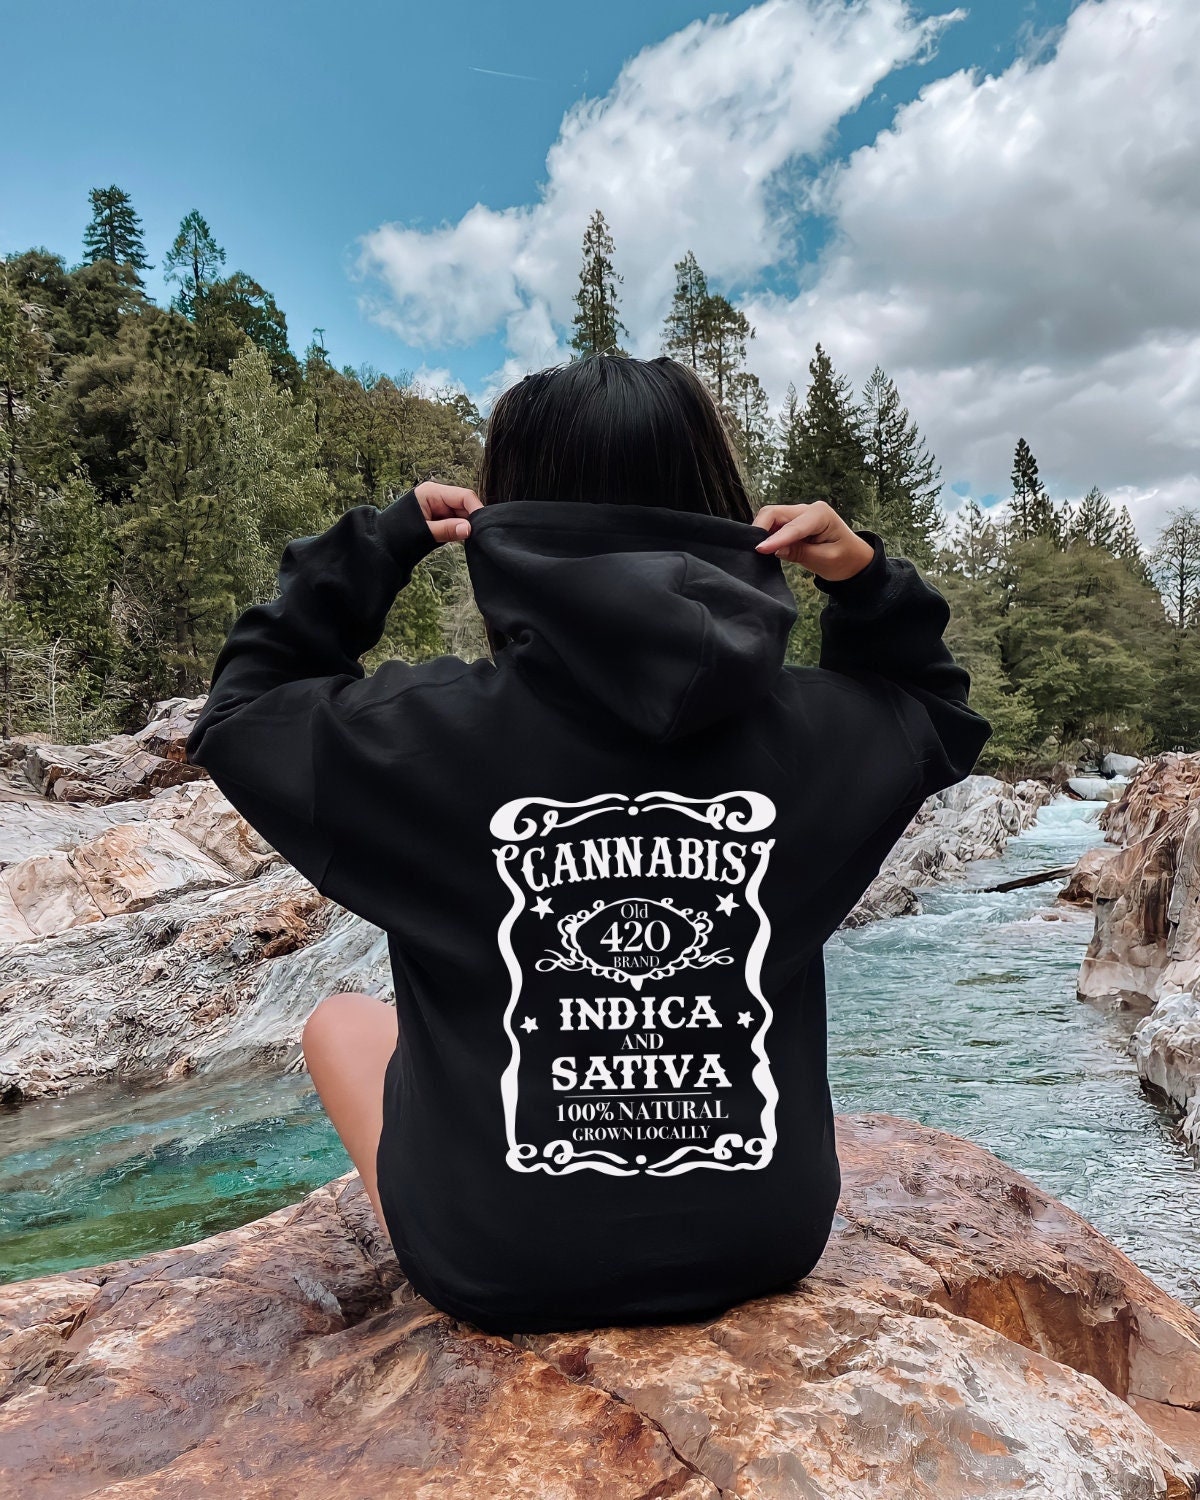 Five hoodies that you can't miss when it comes to printed weed